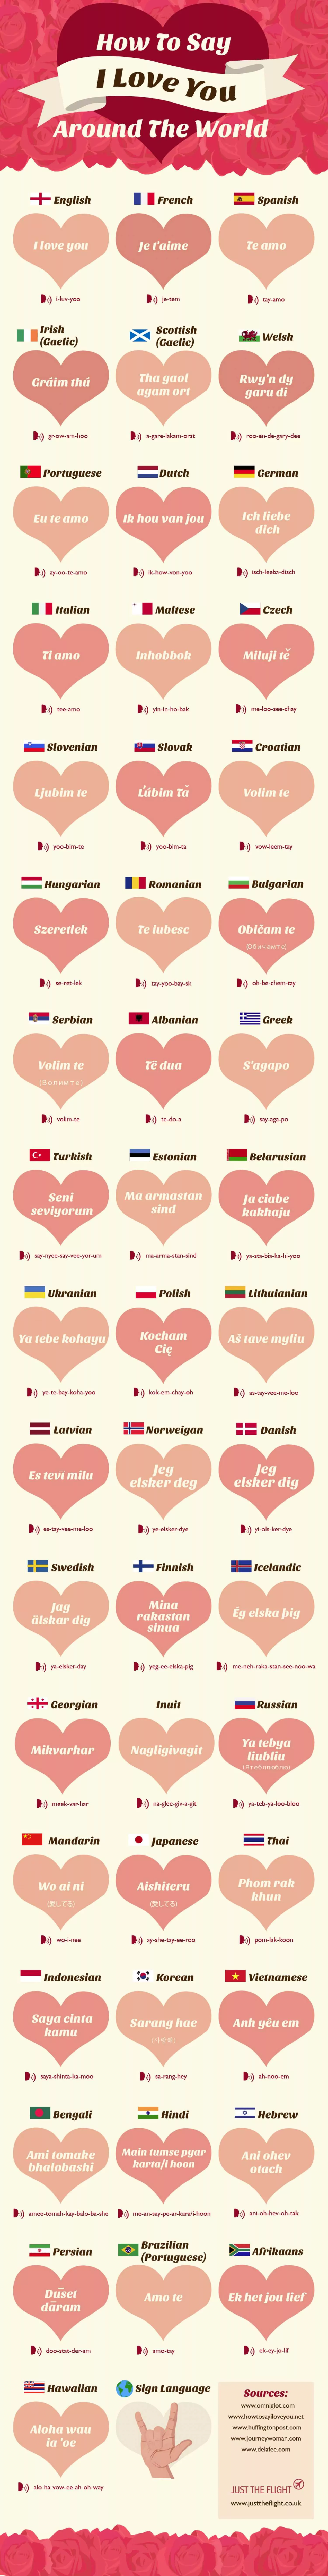 How To Say I Love You Around The World